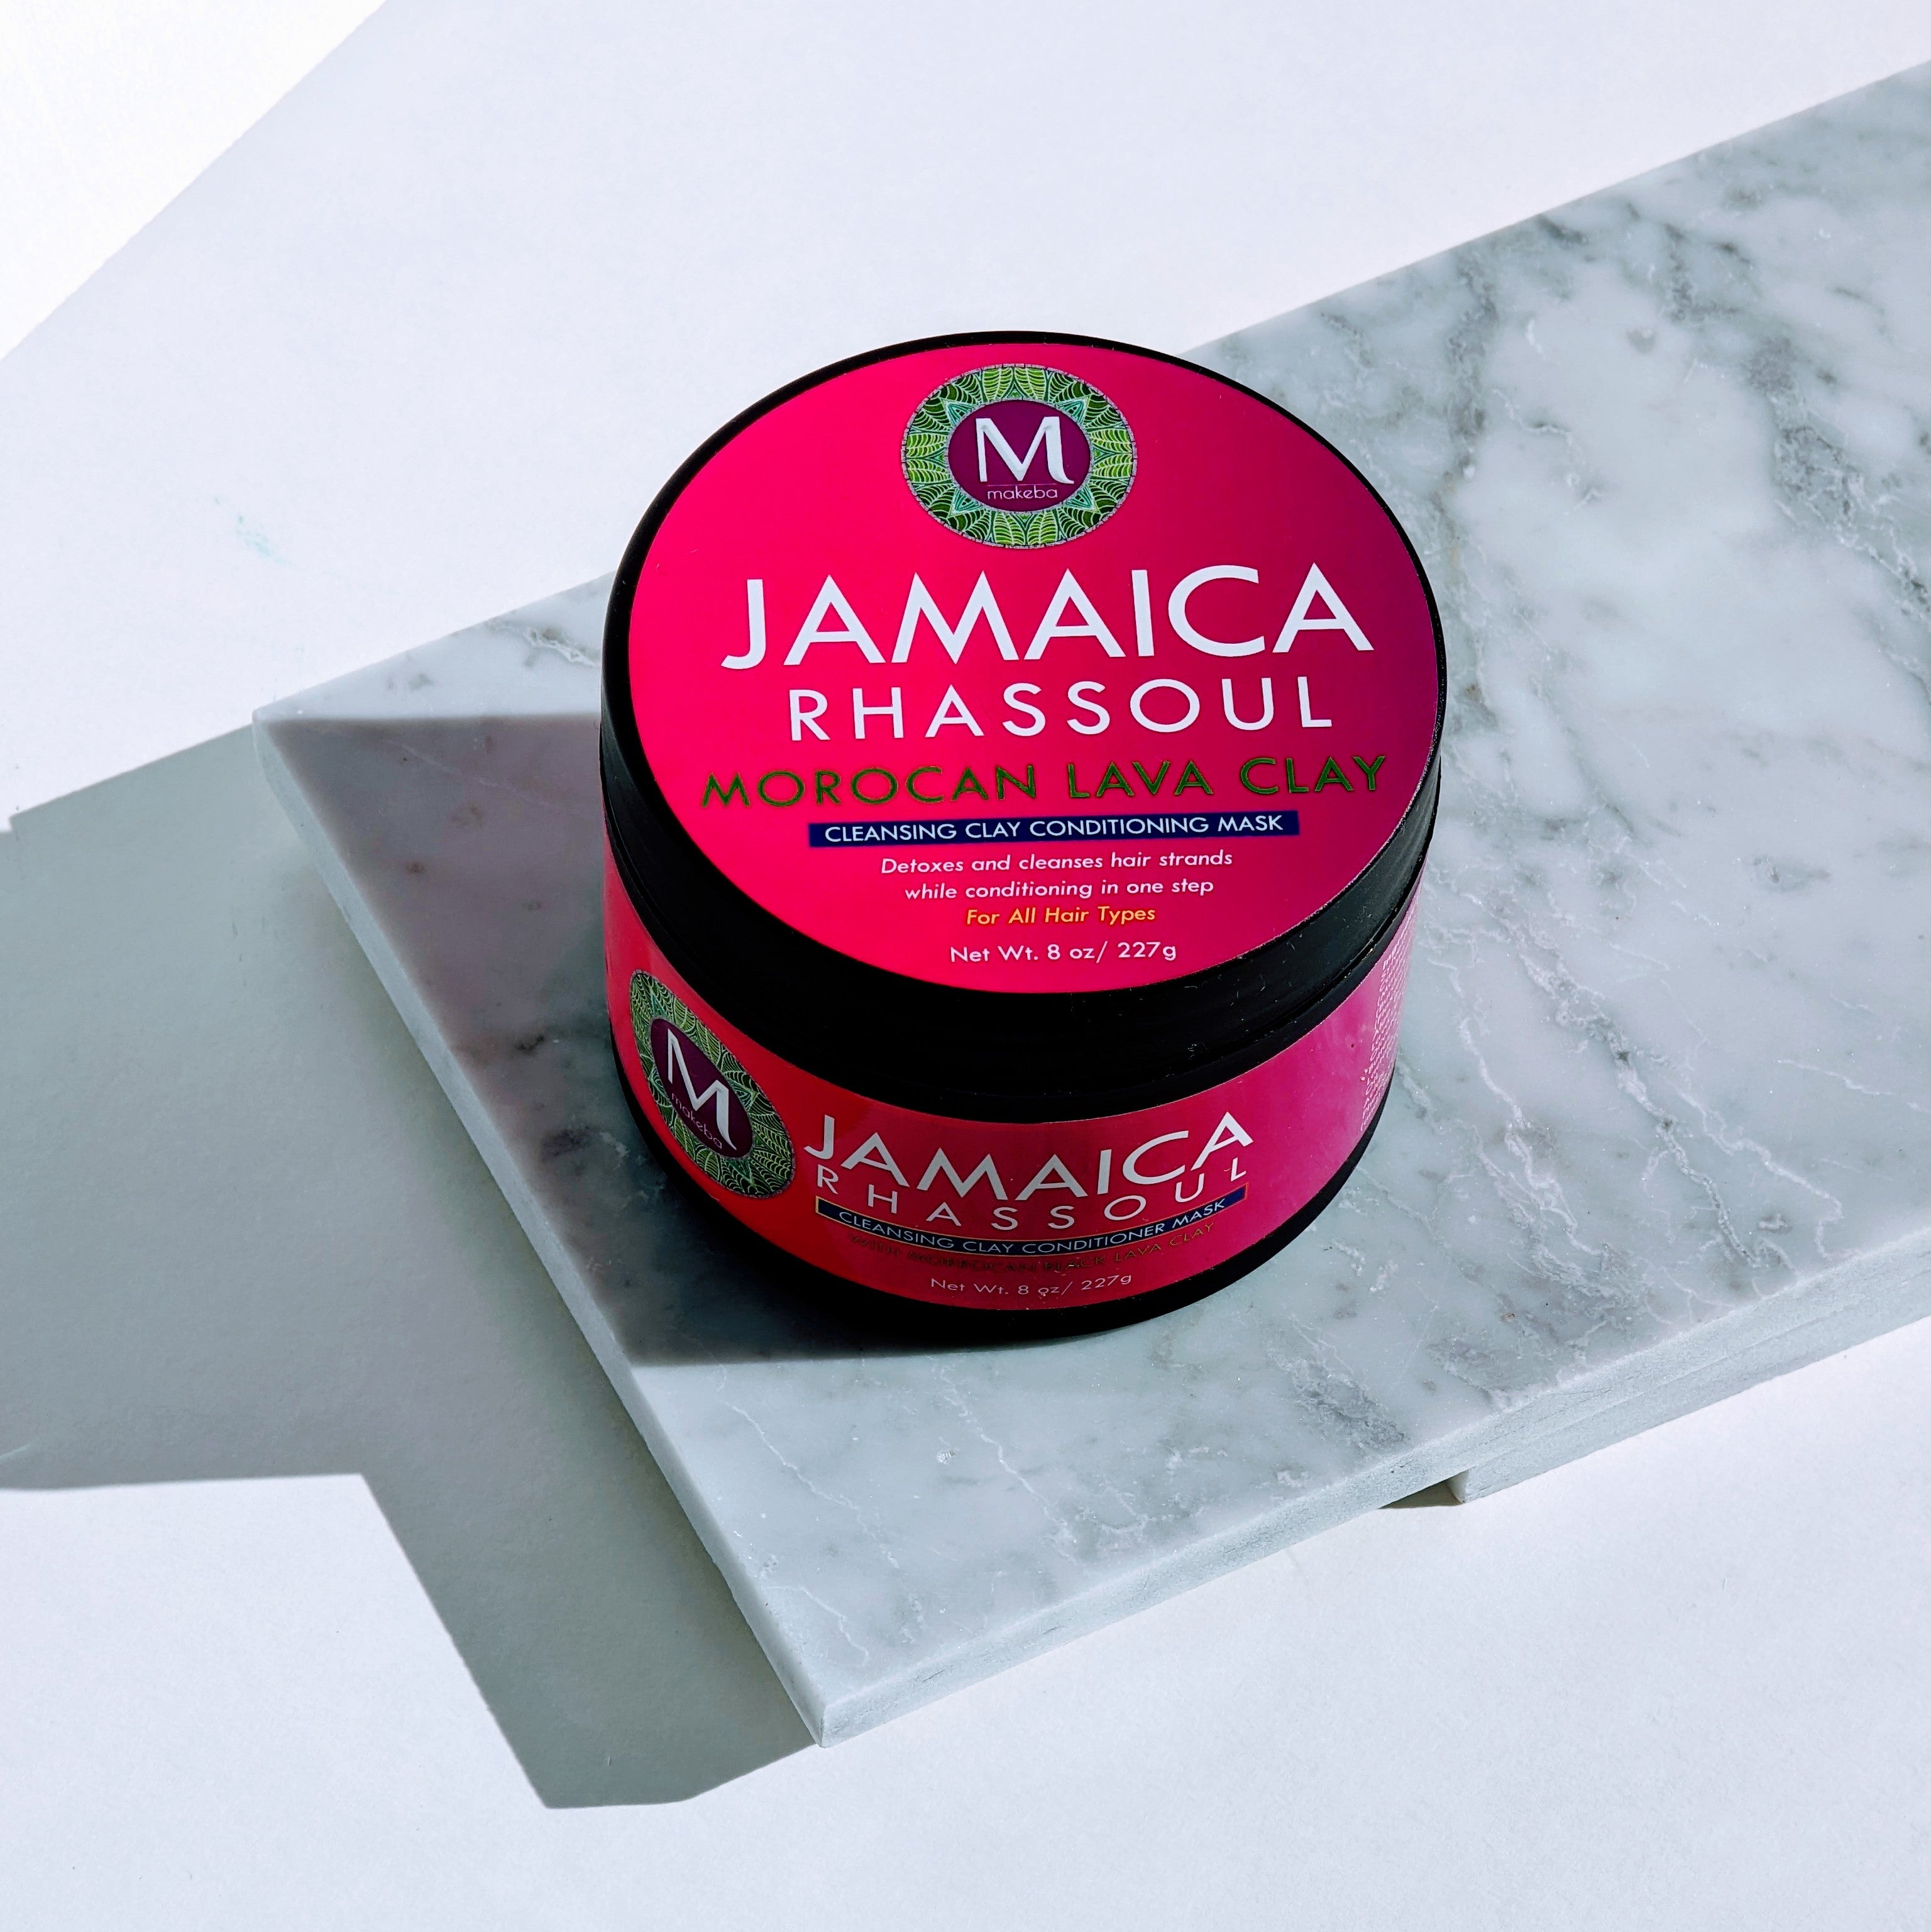 JAMAICA RHASSOUL Cleansing Conditioner Mask